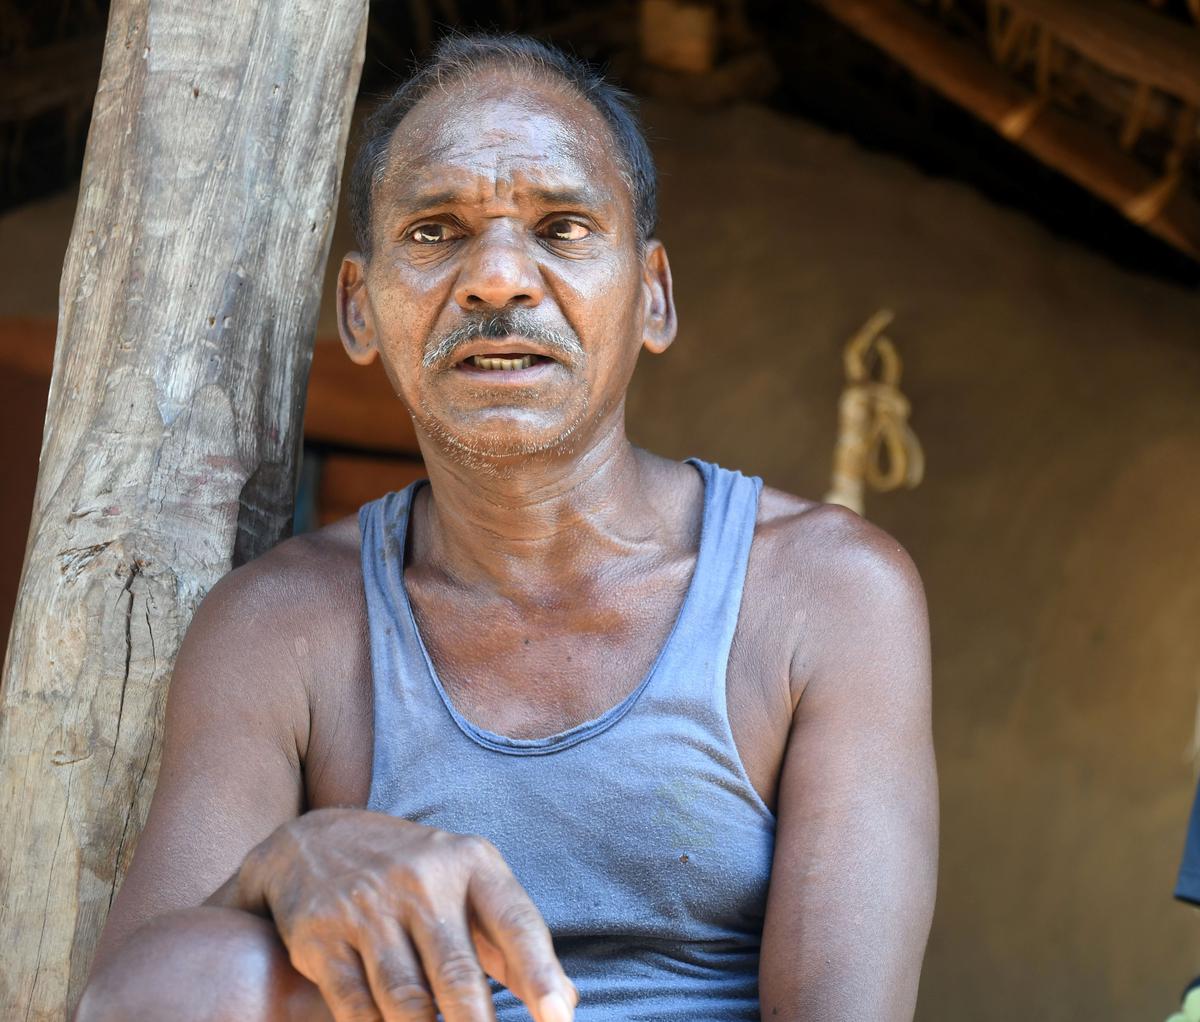 Helpless situation: 50-year-old Markam Soma says when his family tried to urgently arrange money for his legal aid, a cow that would typically go for ₹13,000 fetched just ₹9,000.